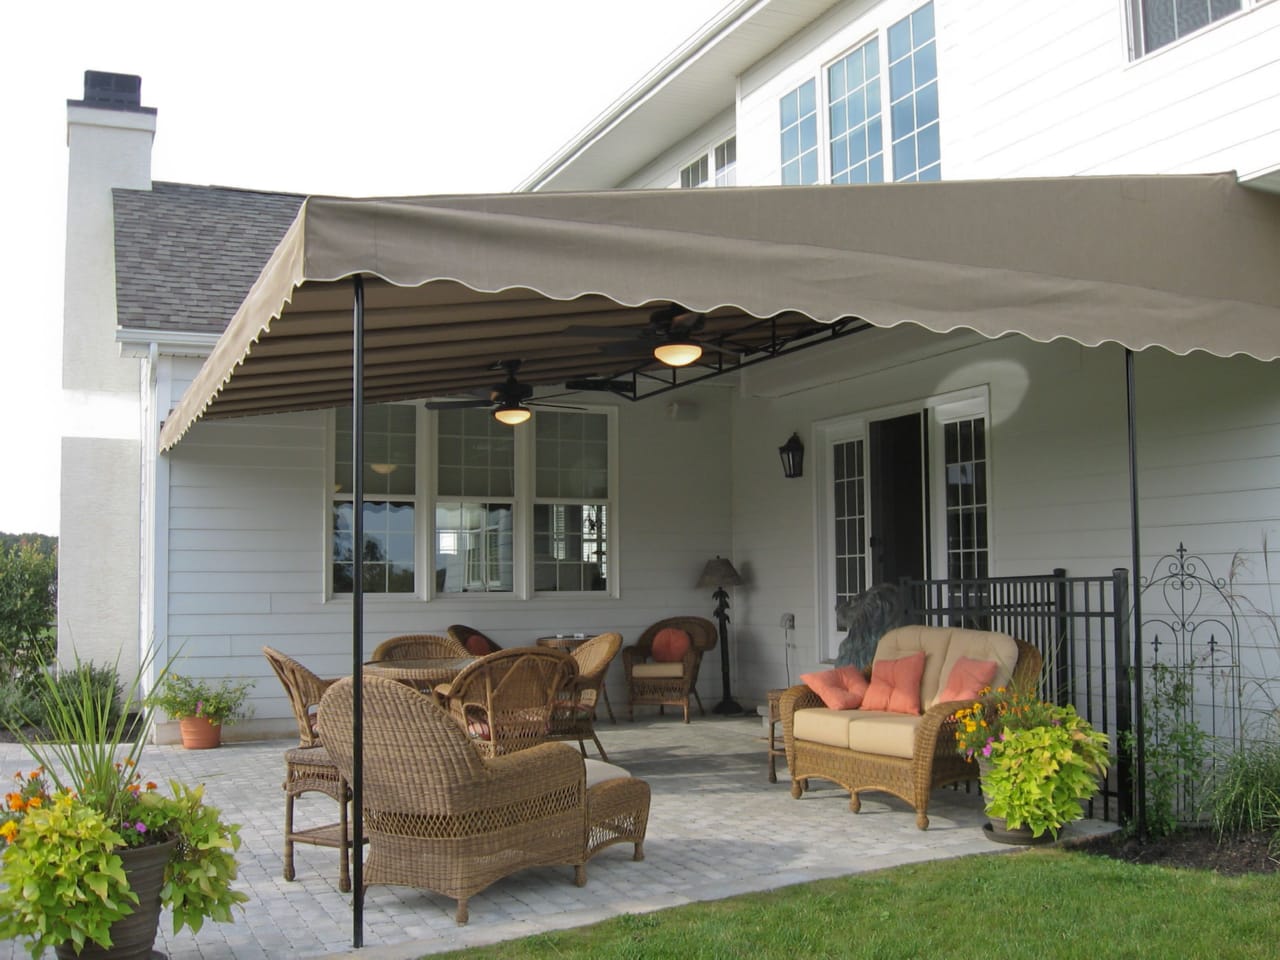 awning over a patio